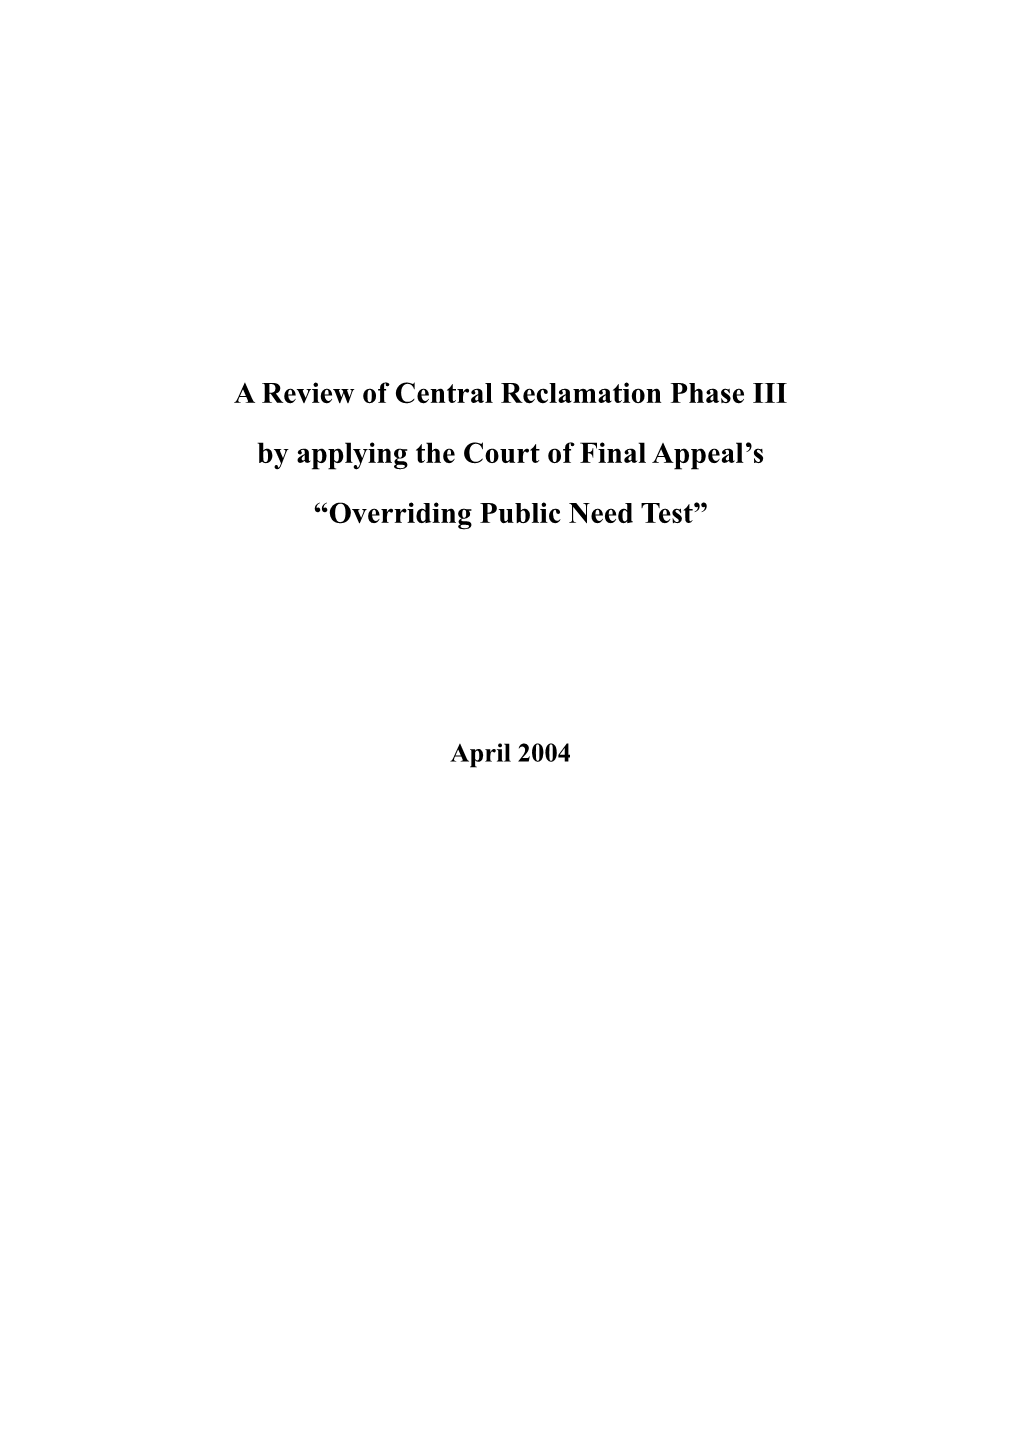 A Review of Central Reclamation Phase III by Applying the Court of Final Appeal's “Overriding Public Need Test”